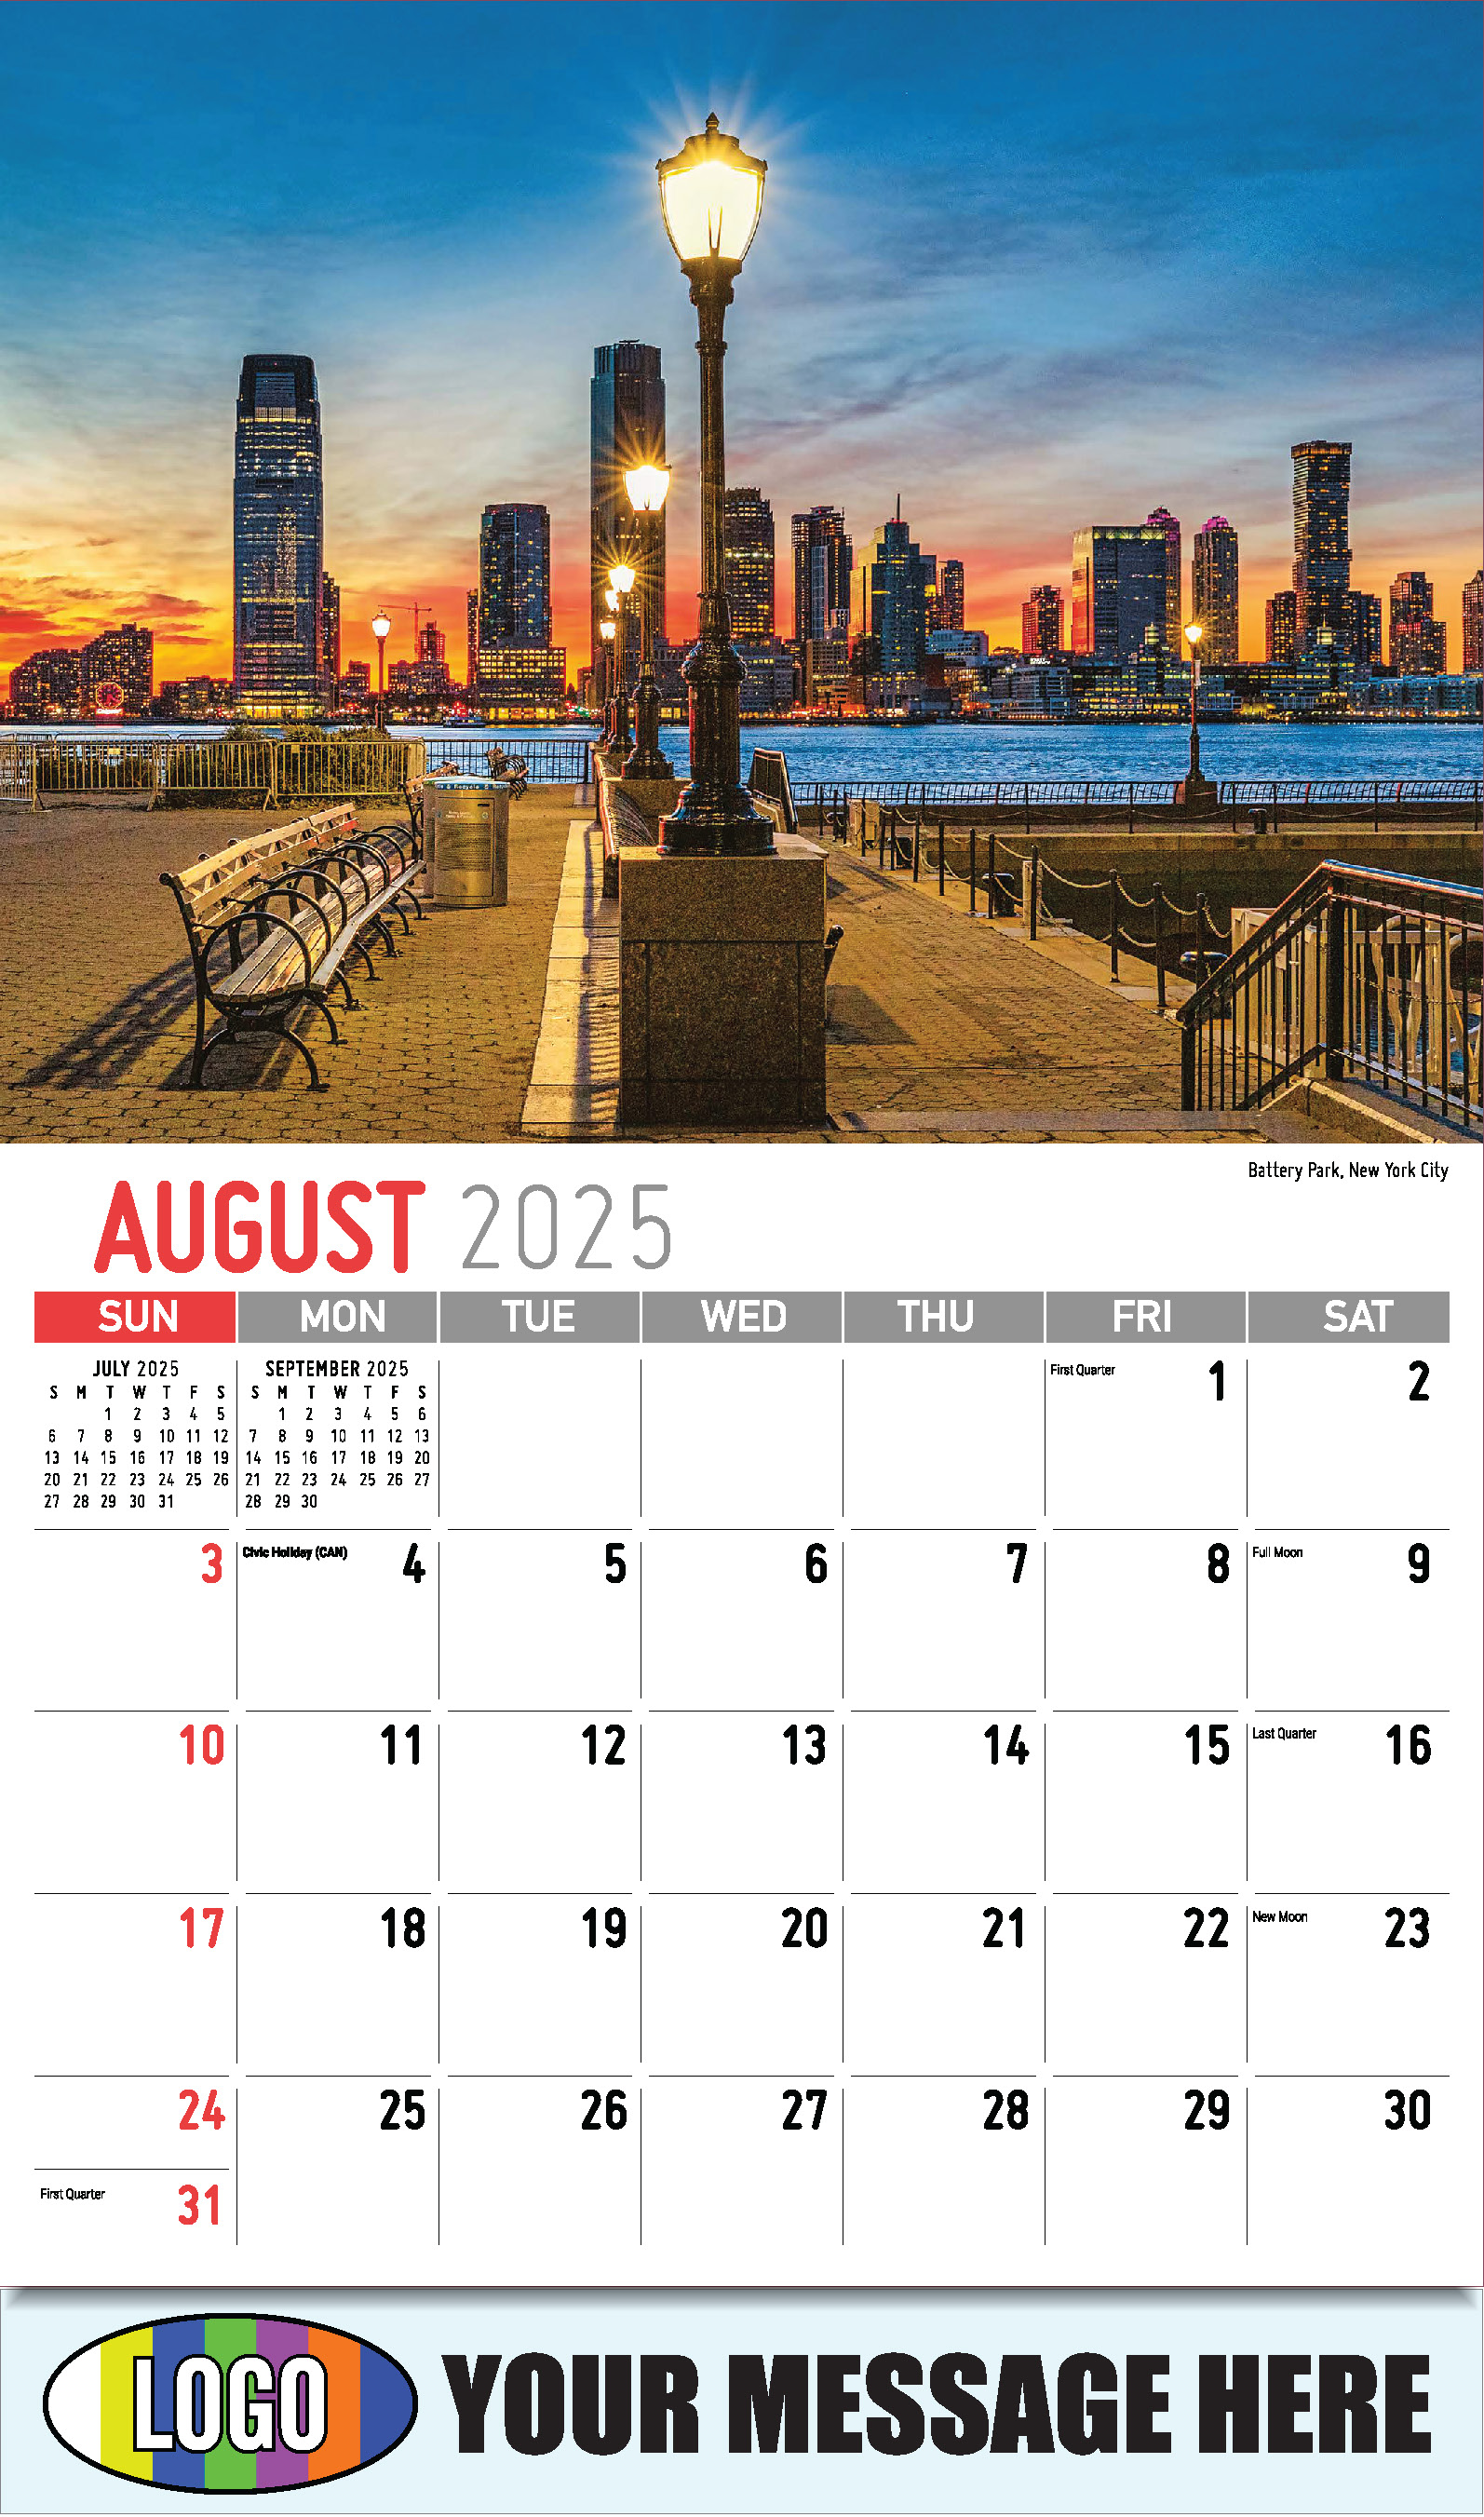 Scenes of New York 2025 Business Promotional Wall Calendar - August